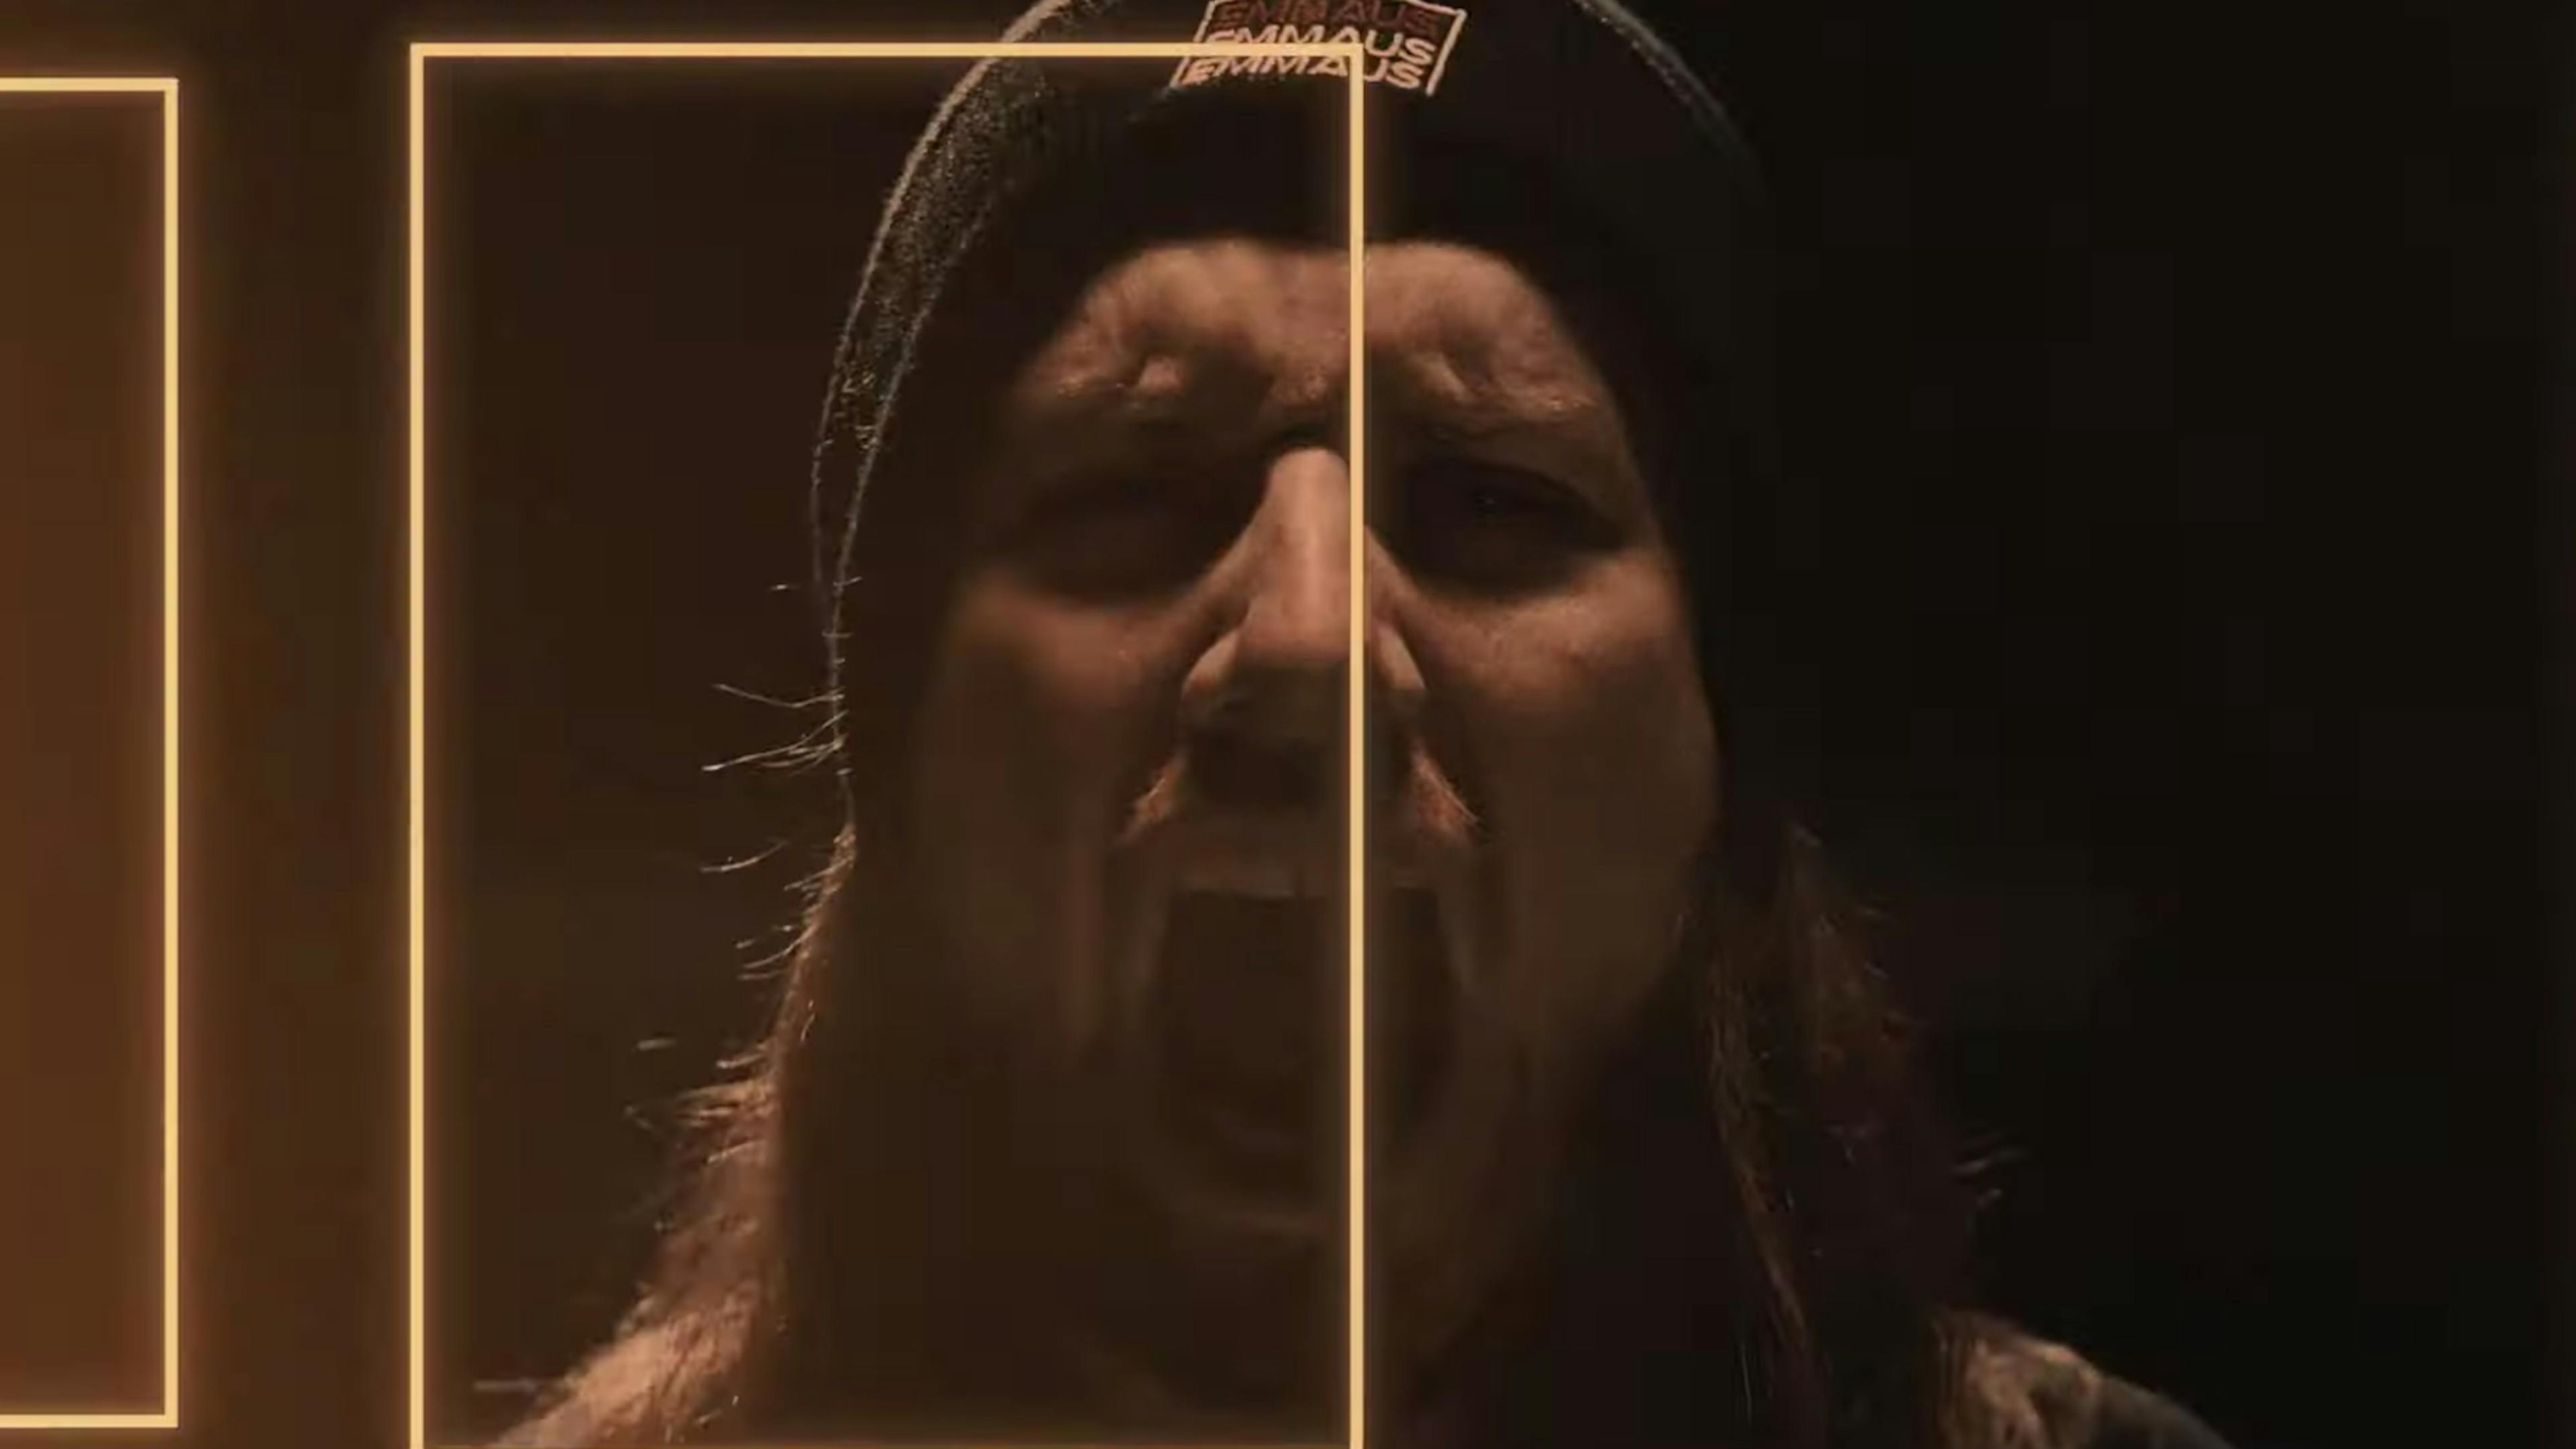 Watch Fit For A King's New Video For Locked (In My Head)